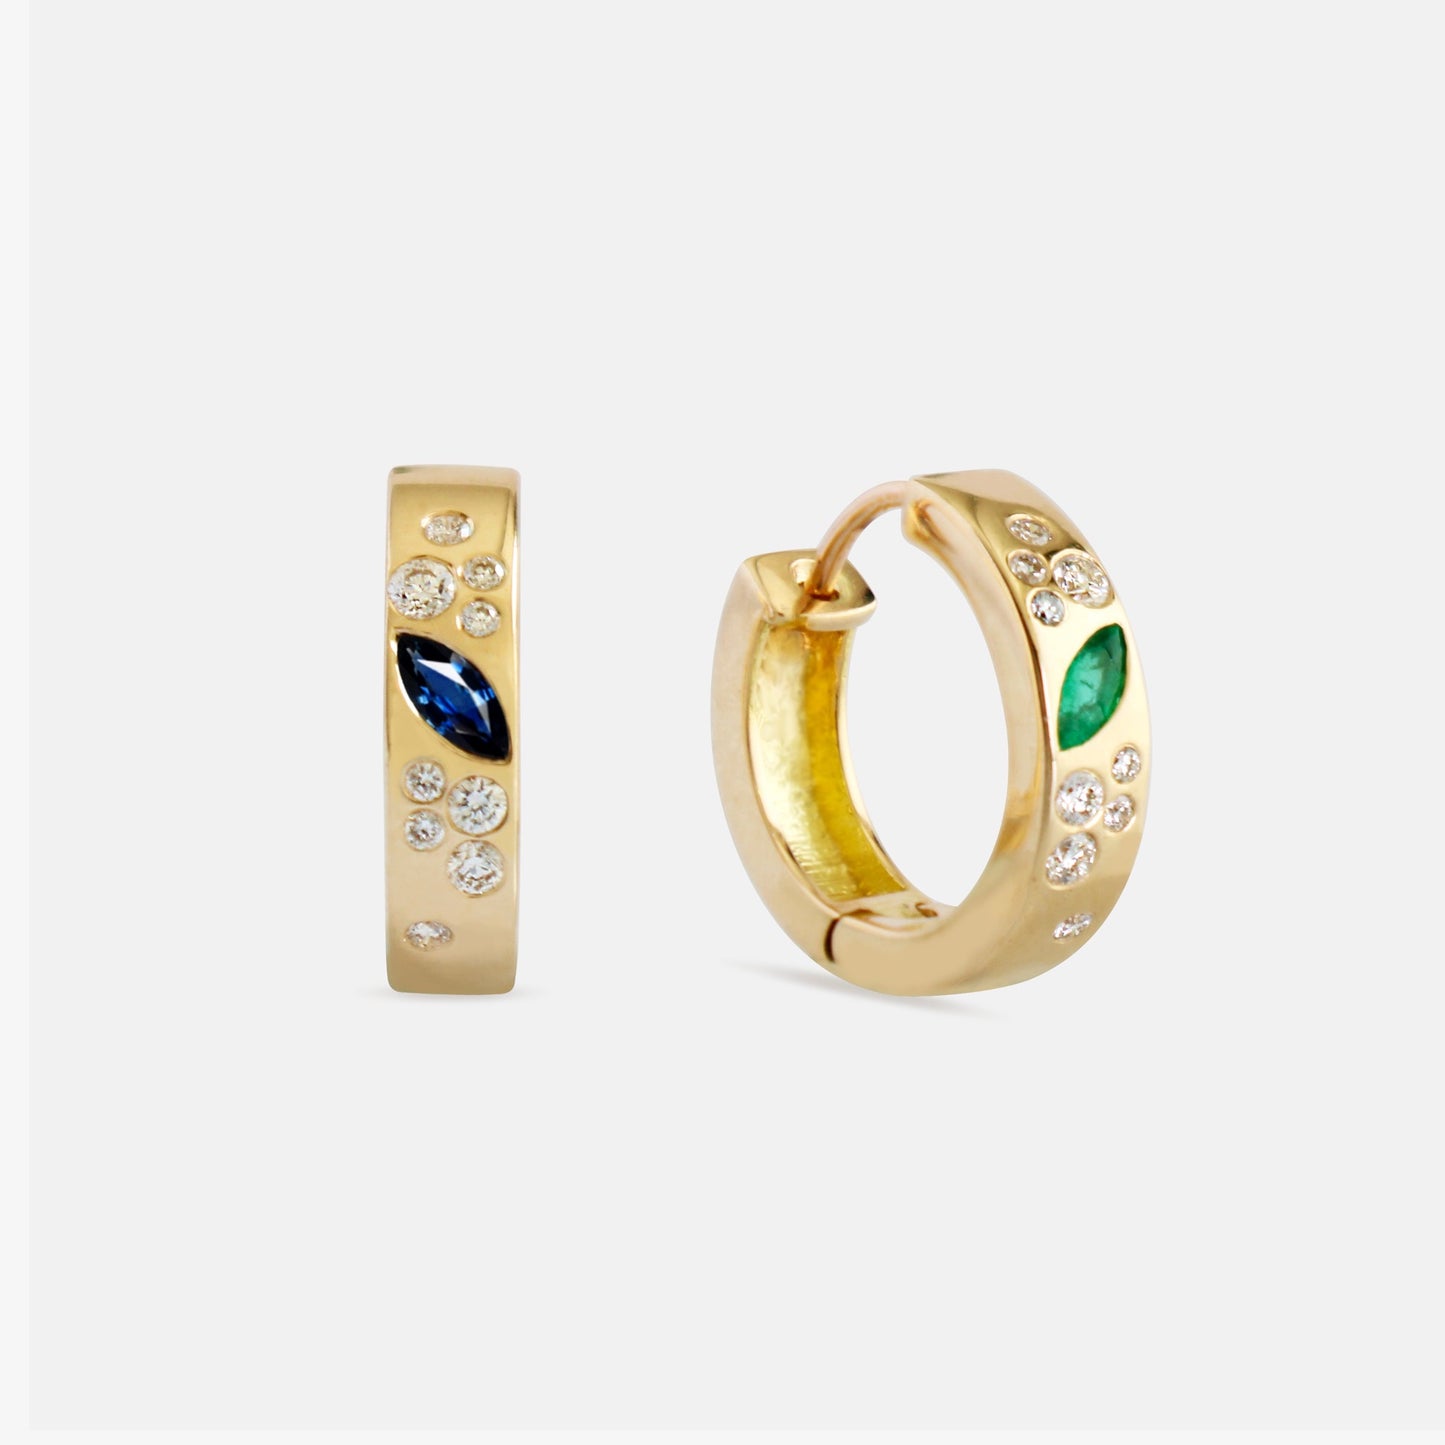 Gravity Hoops in Diamonds, Sapphires and Emeralds